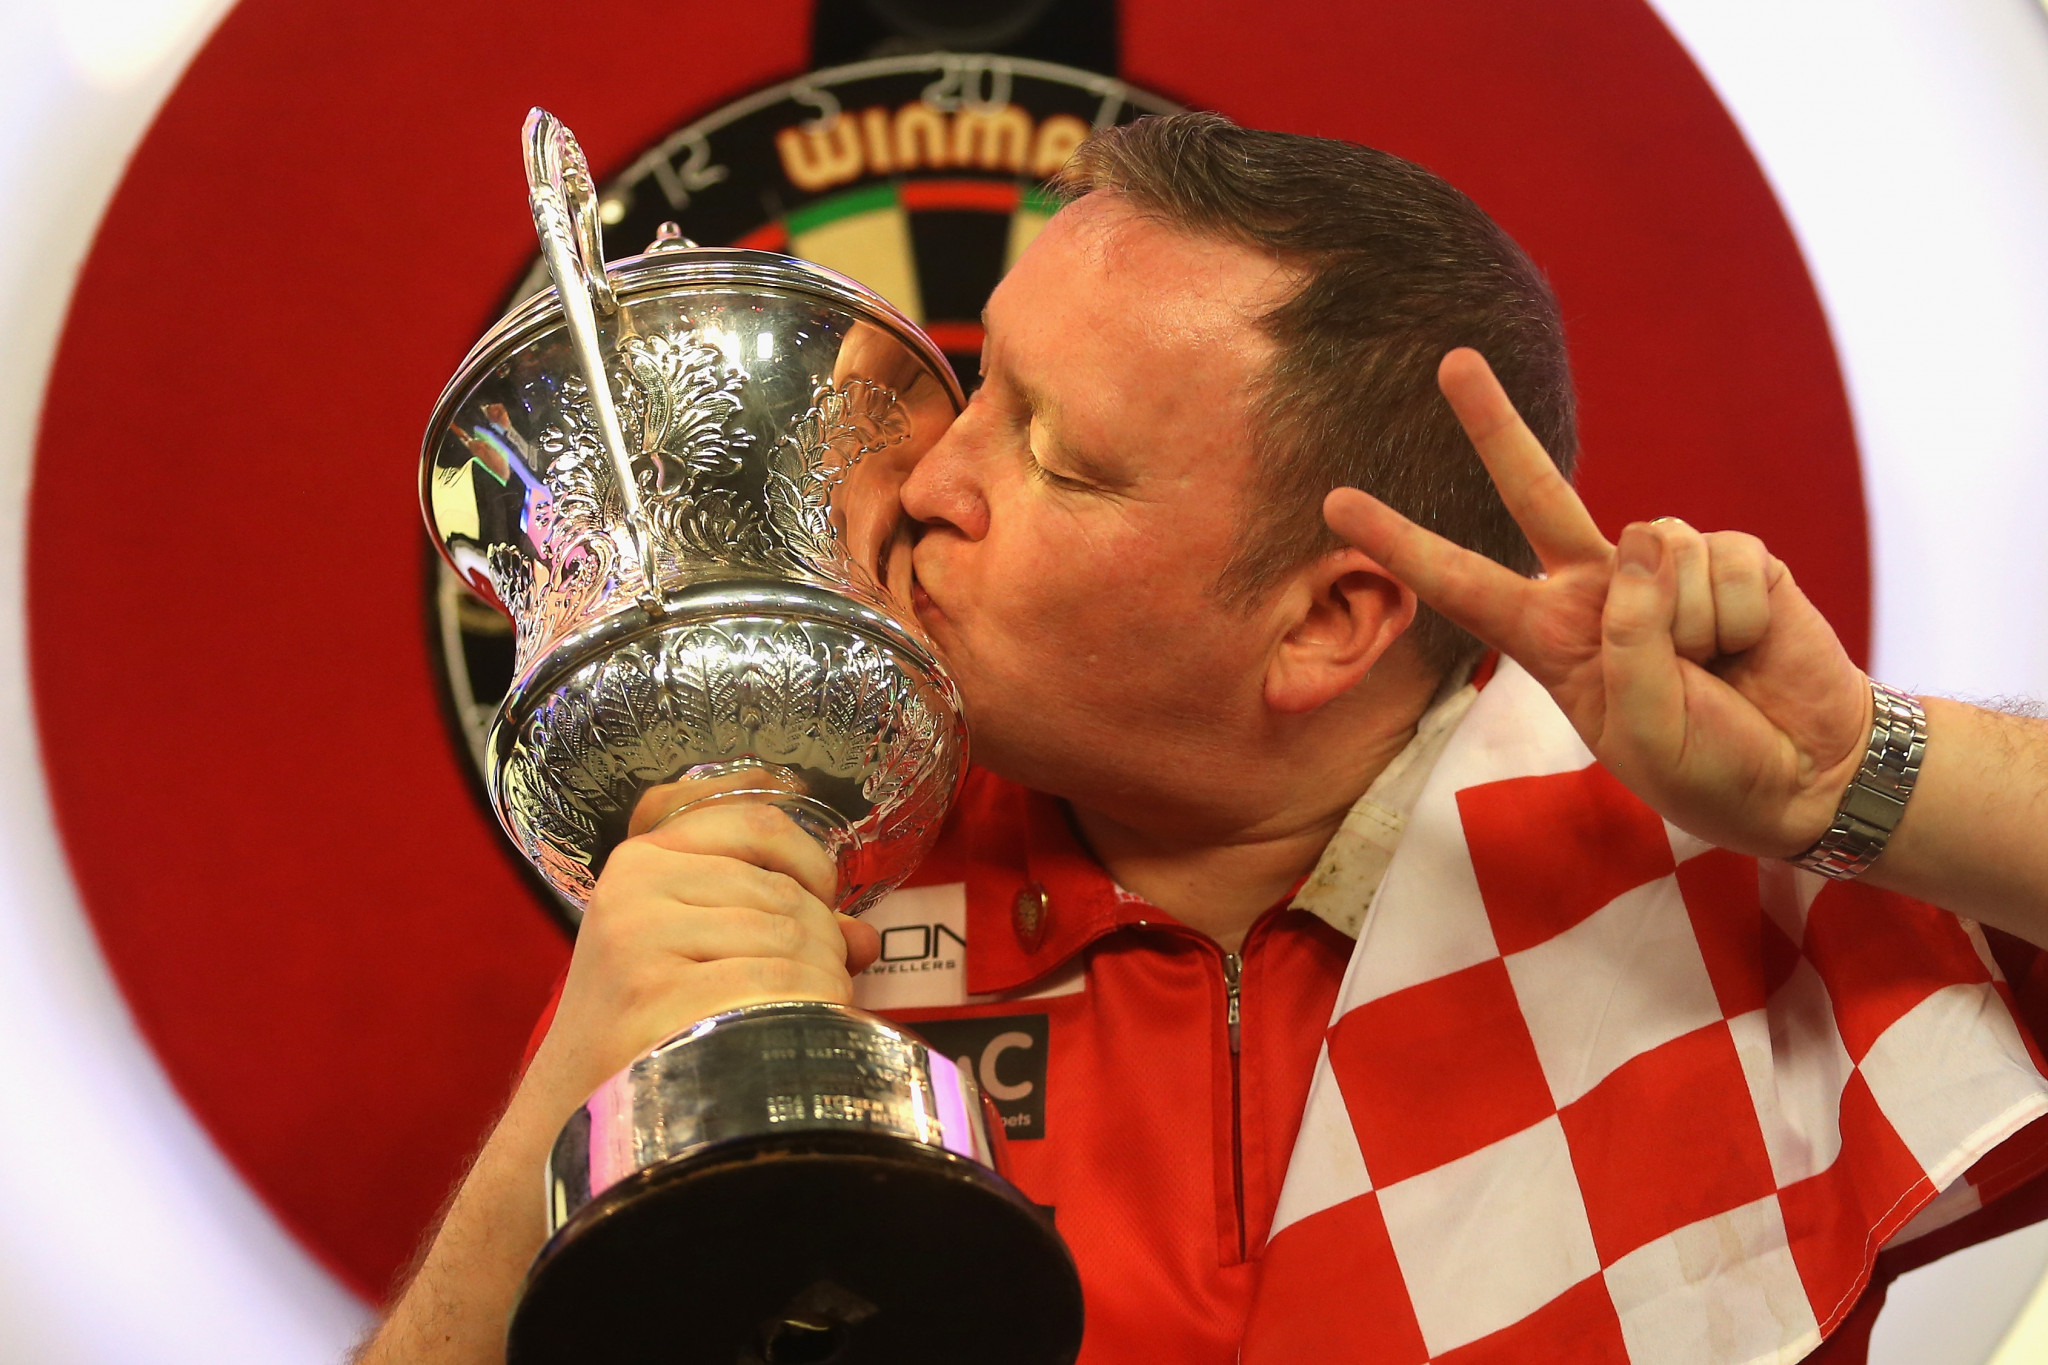 England's Glen Durrant has successfully defended his British Darts Organisation World Championships title ©Getty Images